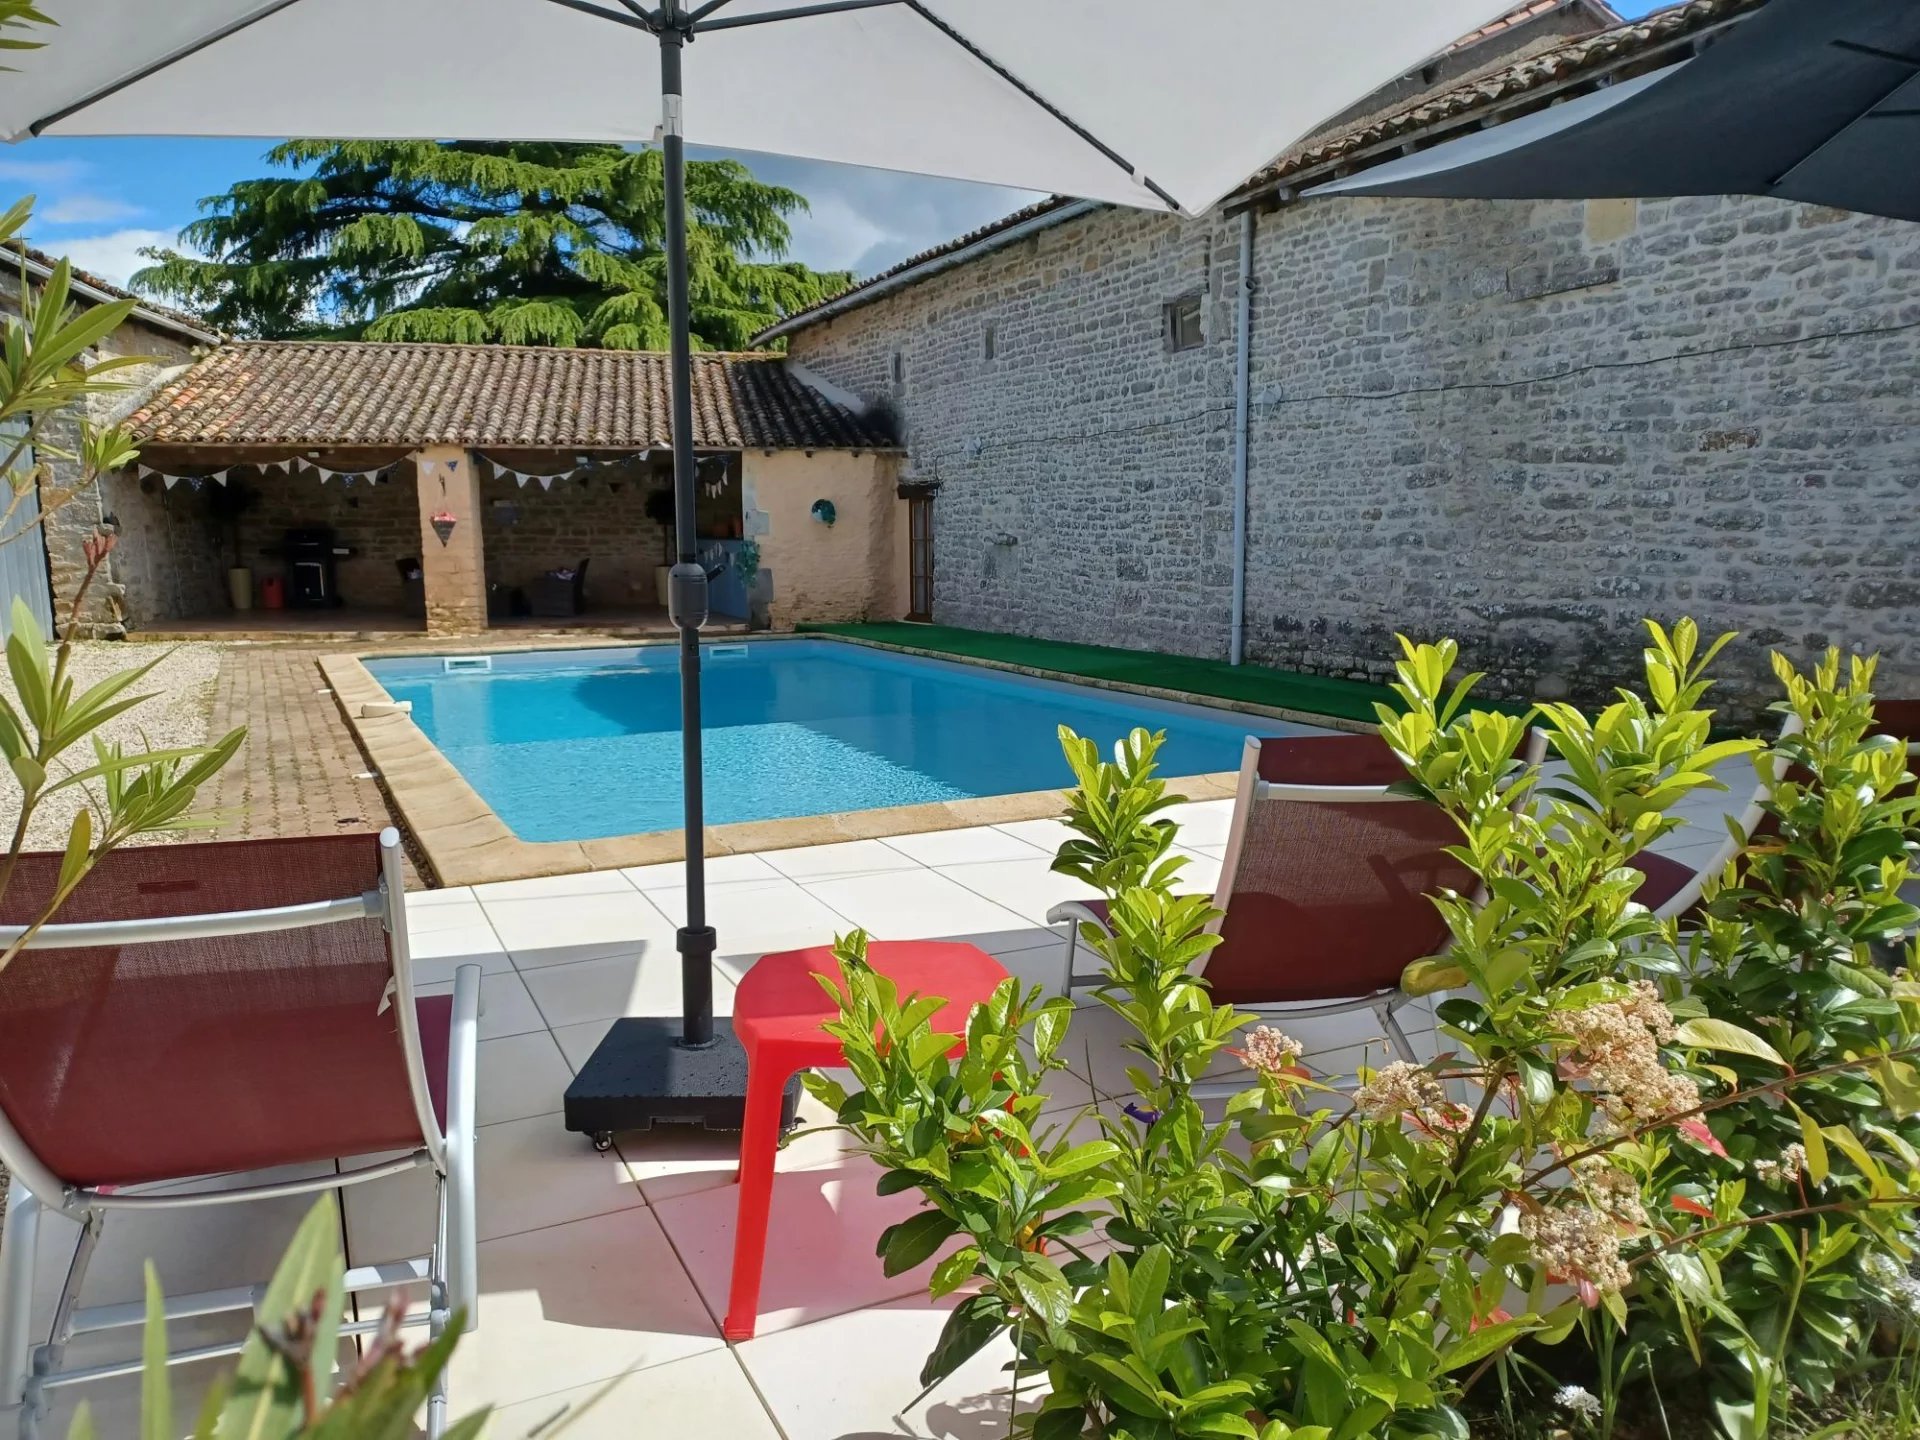 Lovely 3 bed house with in-ground pool with 2 guest houses and a 1 bed annexe